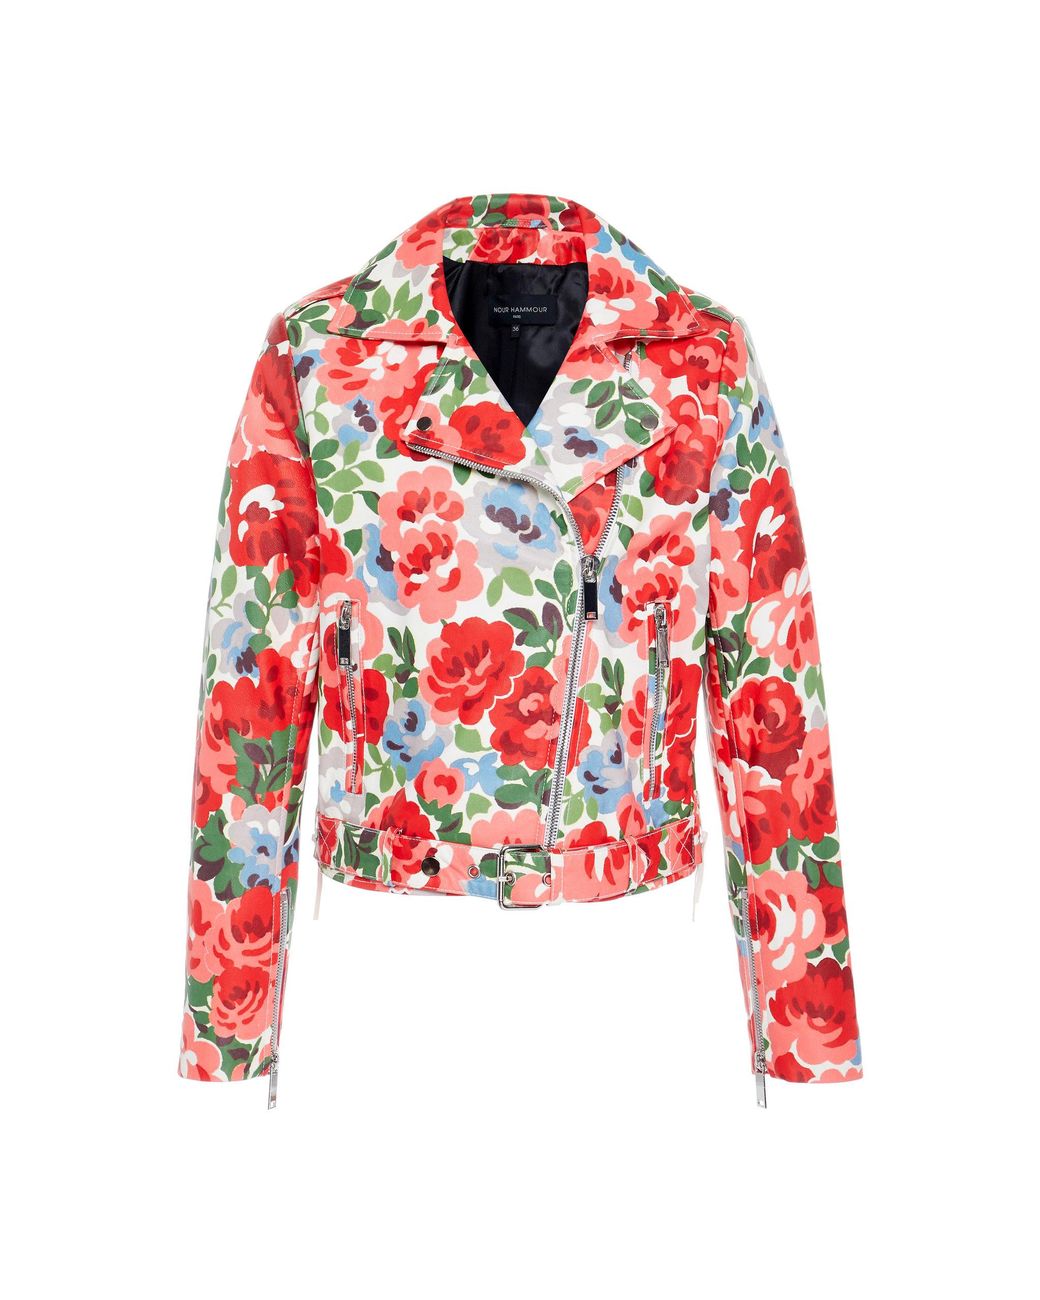 Nour Hammour Leather Daphne Print Lambskin Jacket in Floral (Red) | Lyst